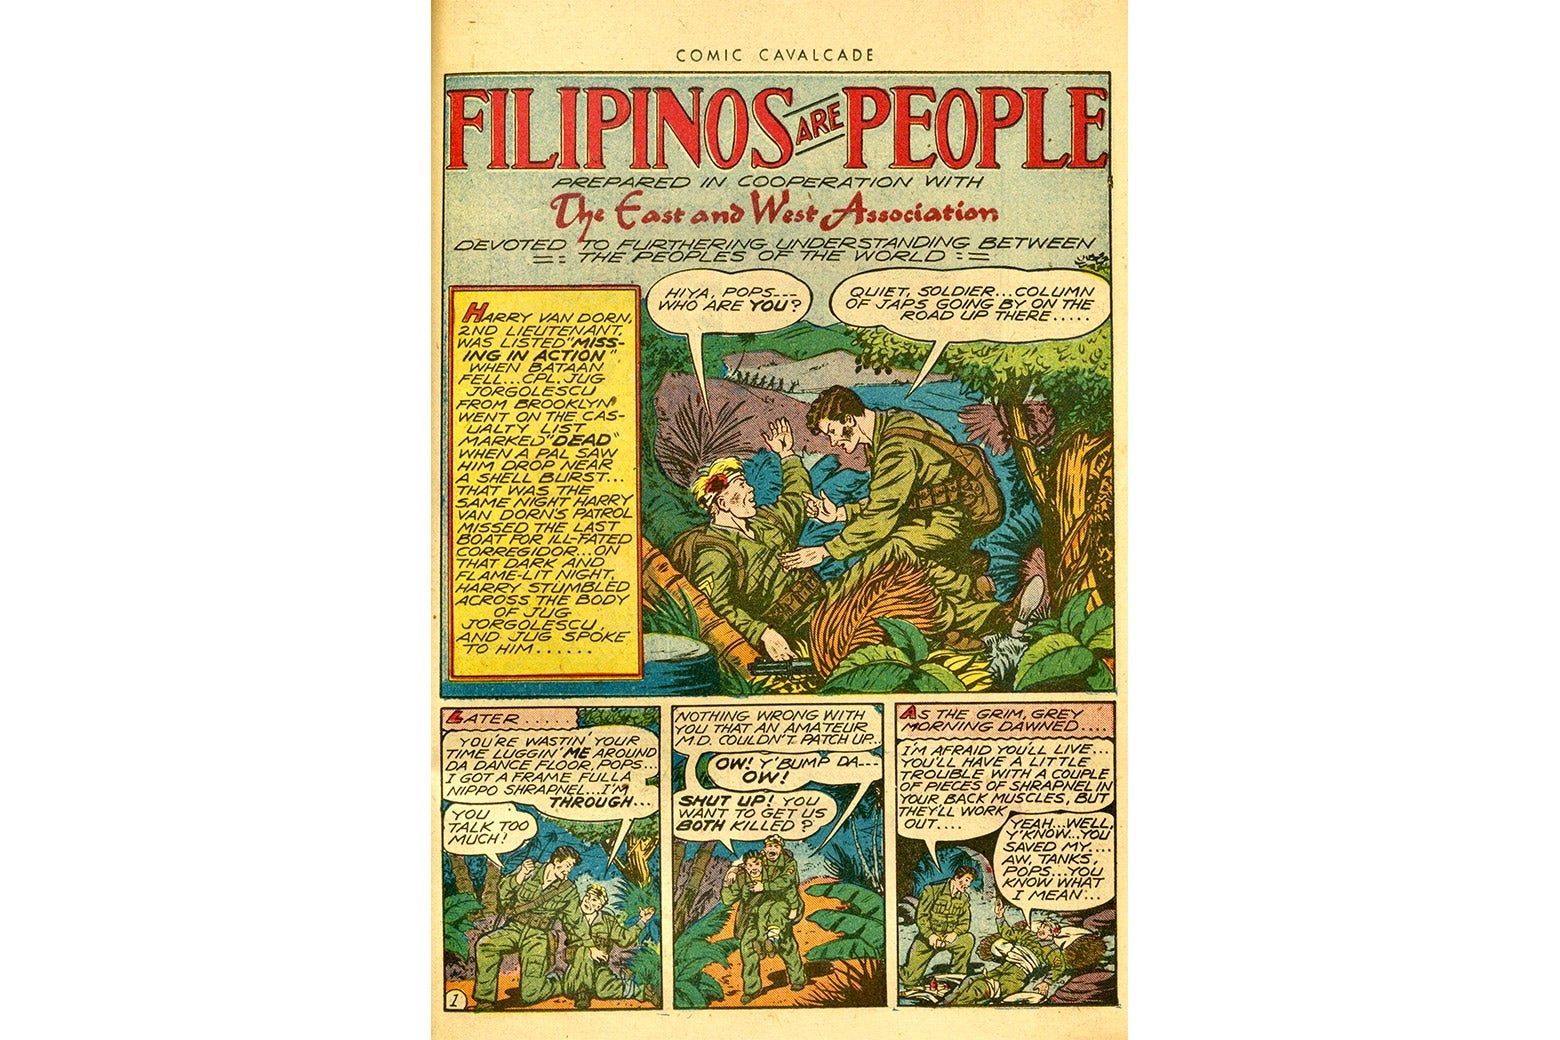 A comic in which an American soldier helps a Filipino man.